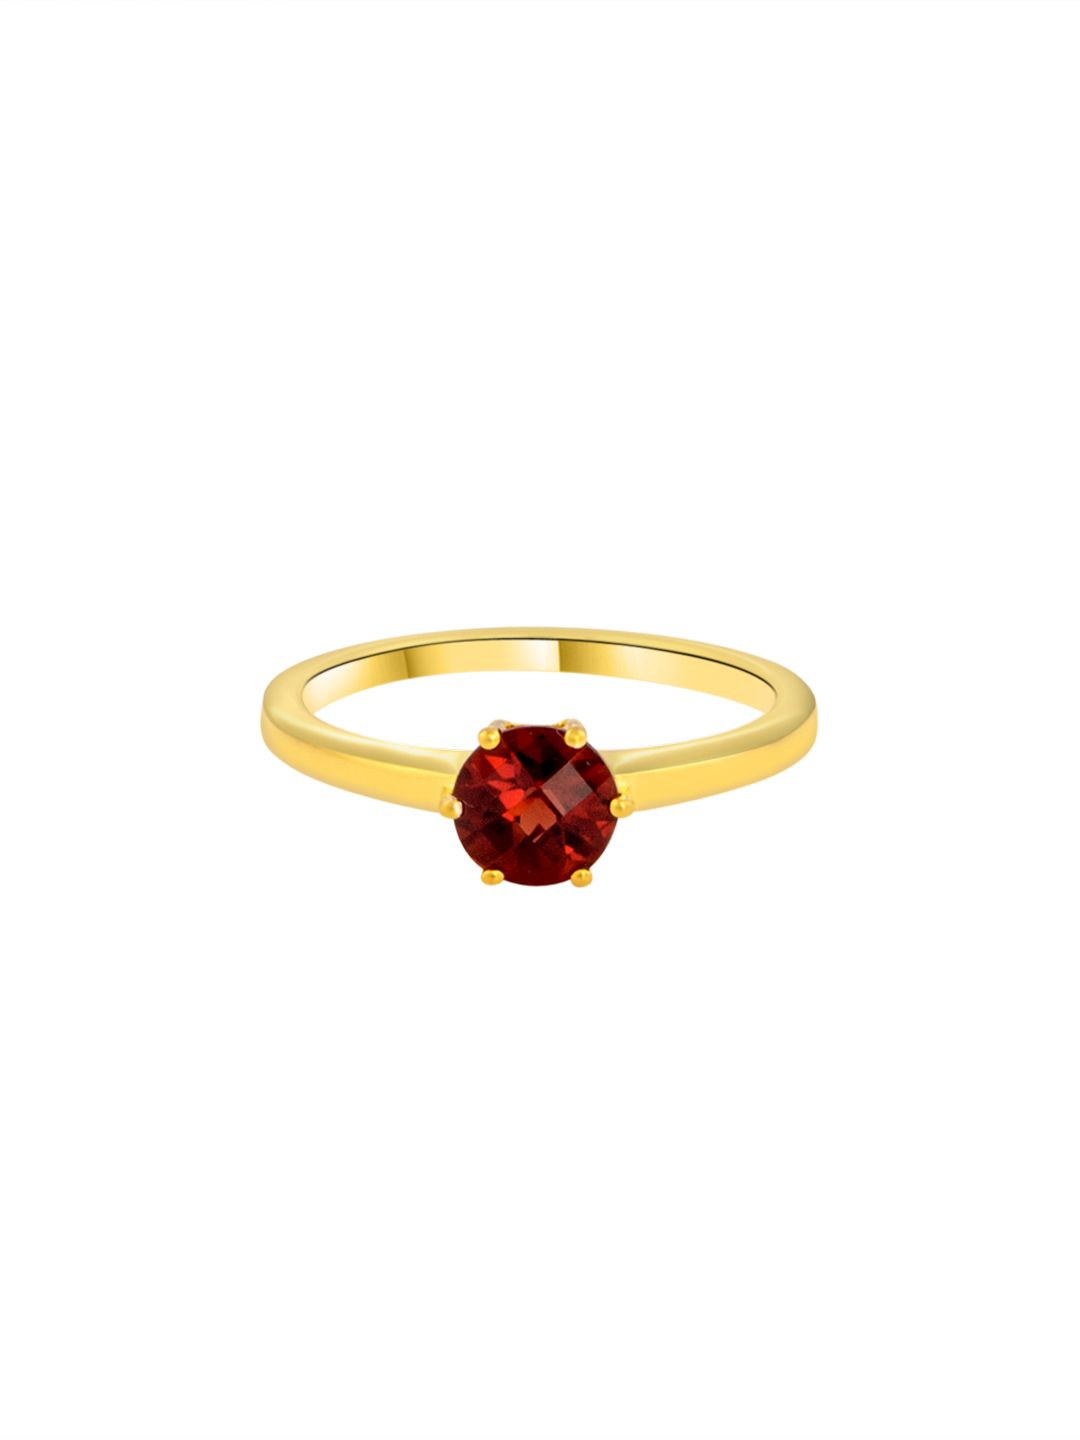 TALISMAN Women Handcrafted Gold-Plated 925 Sterling Silver Red Garnet-Studded Ring Price in India